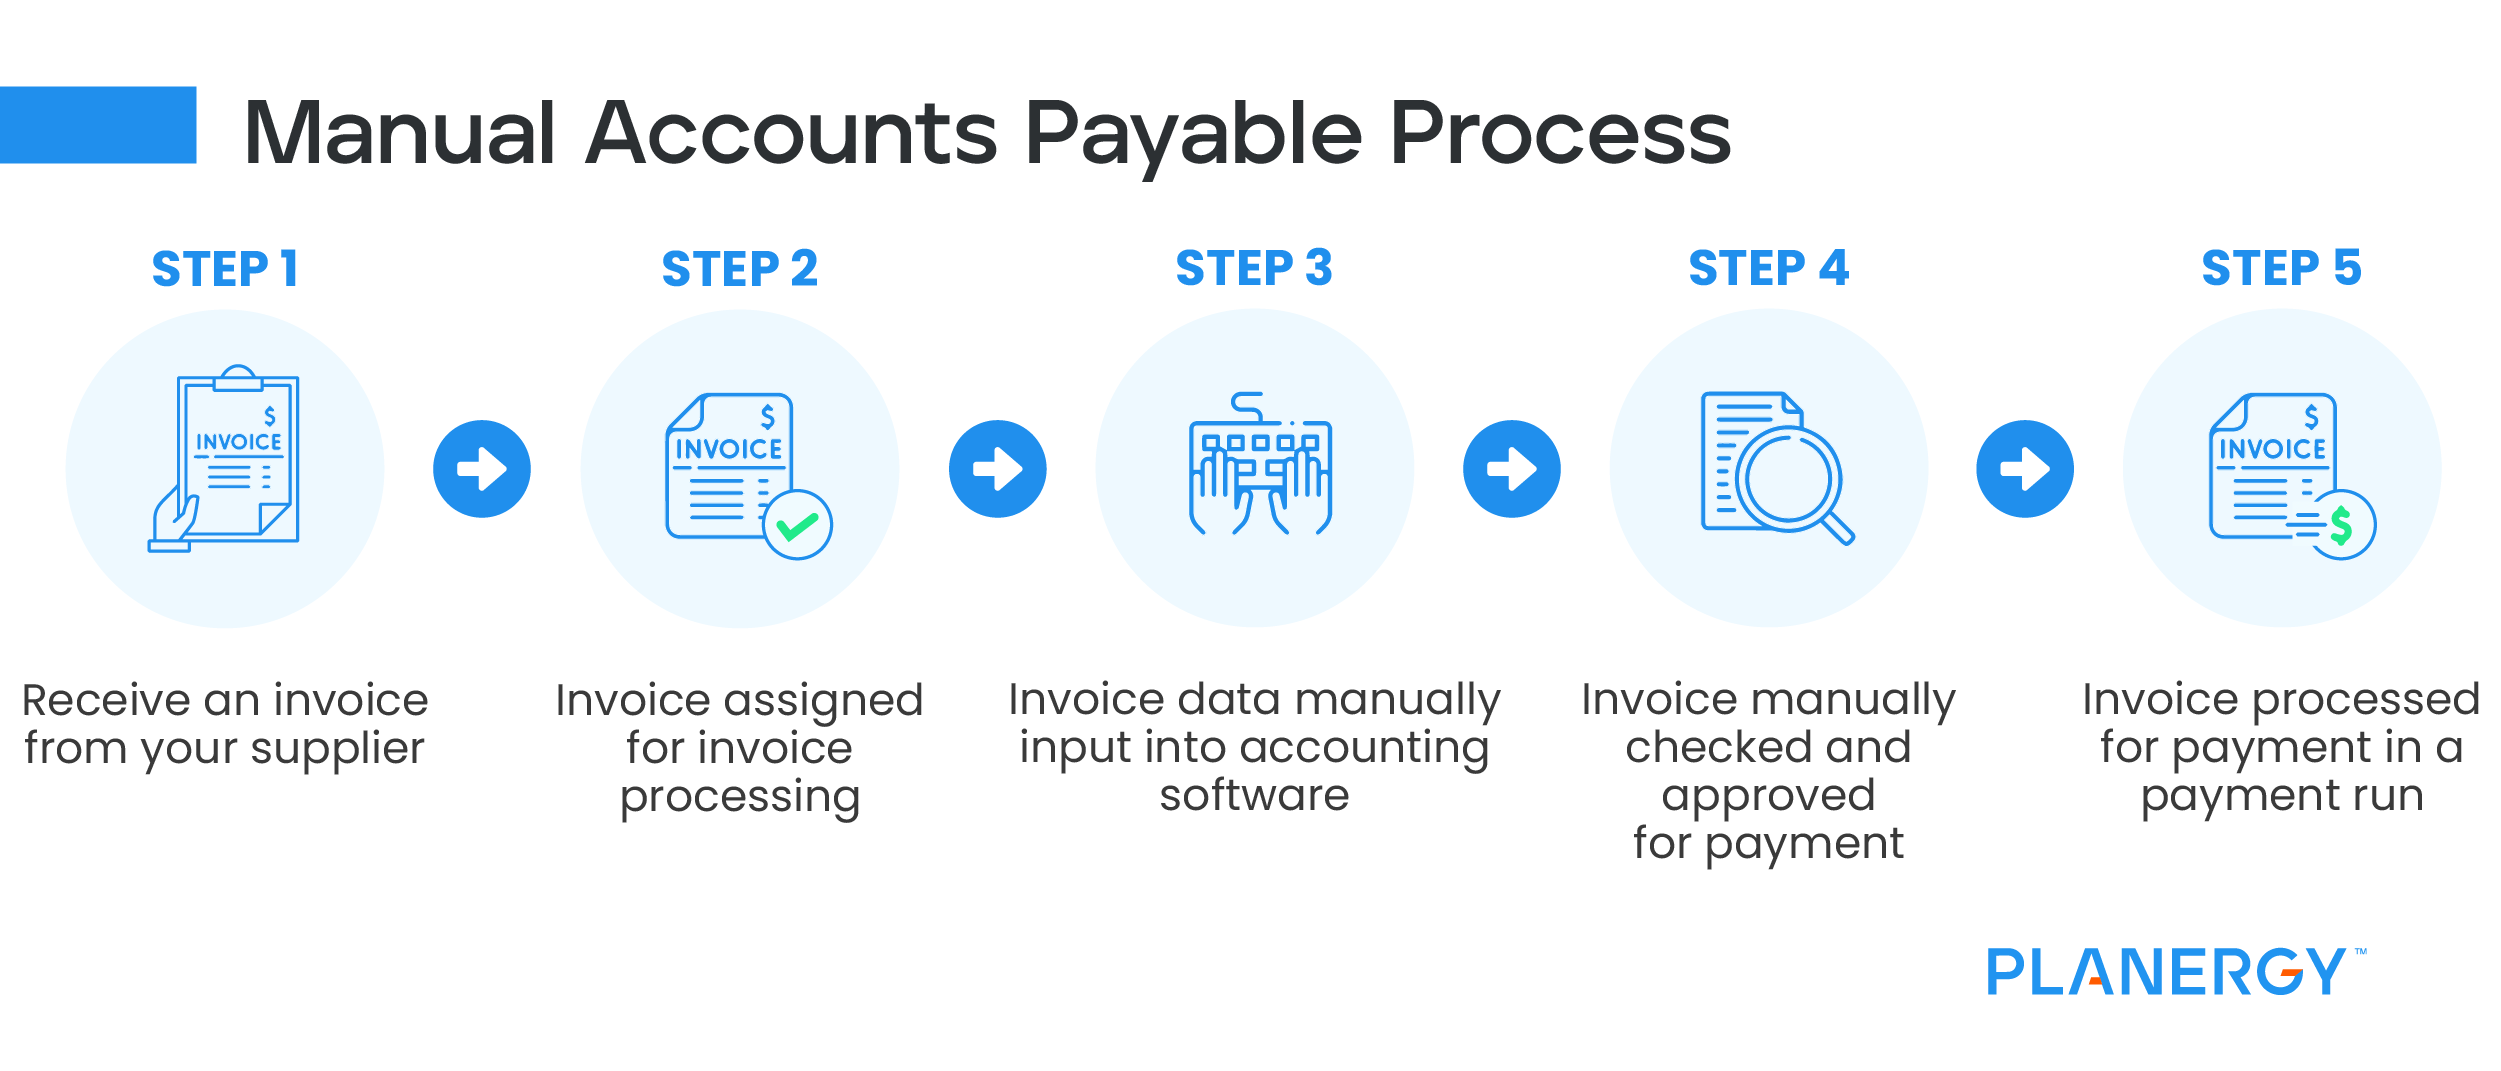 Best Practices for Accounts Payable Processes Planergy Software